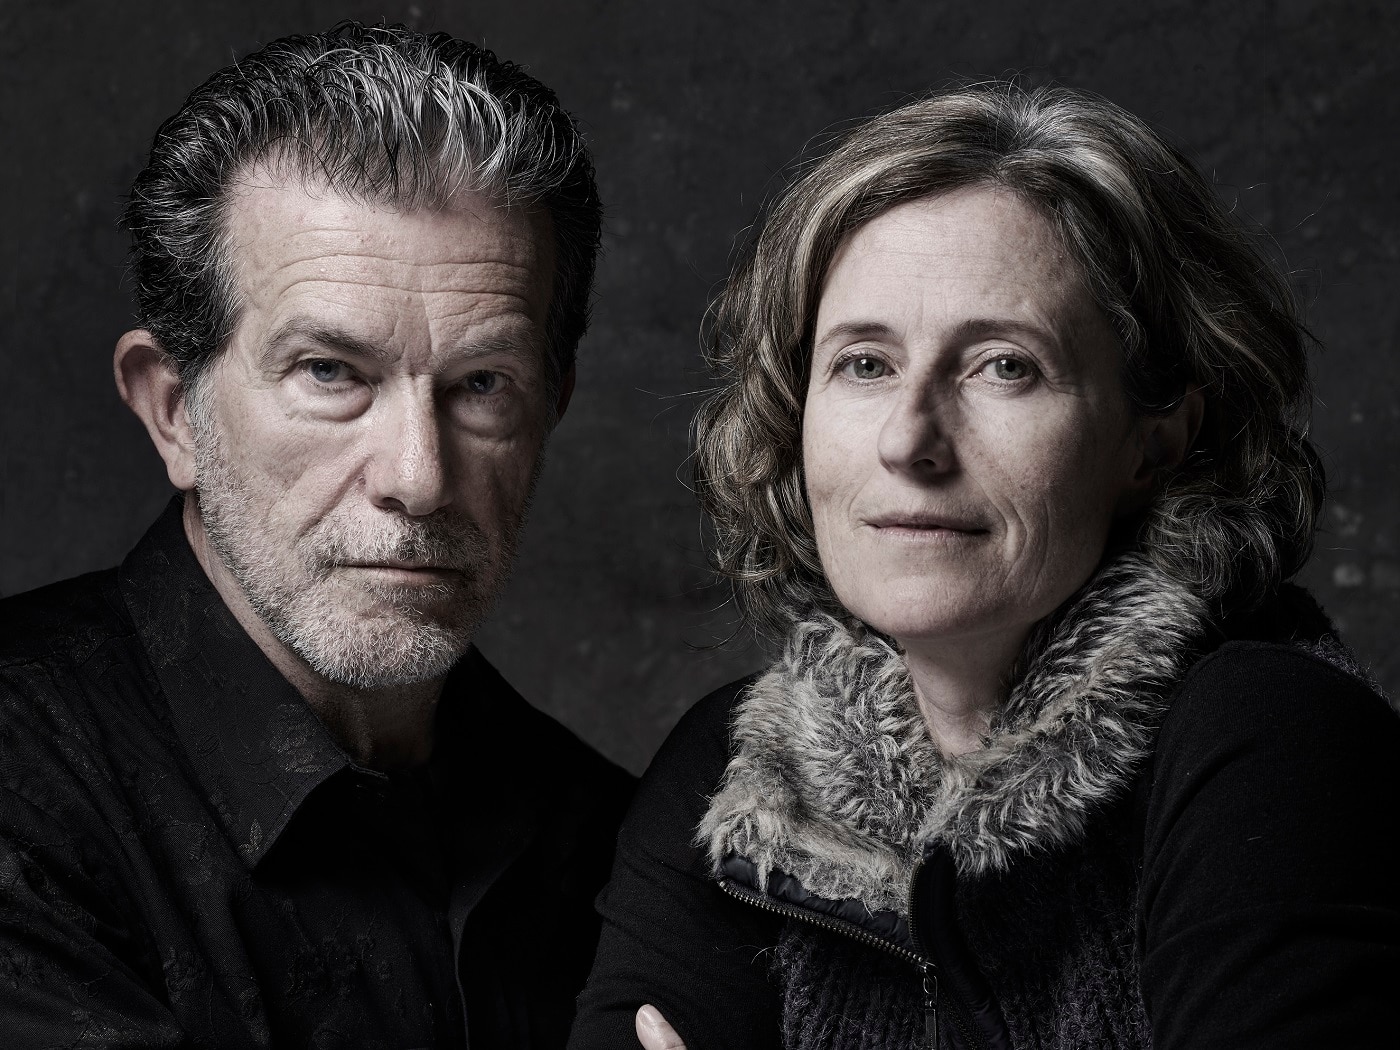 A desaturated portrait of Richard Morecroft and Alison Mackay.